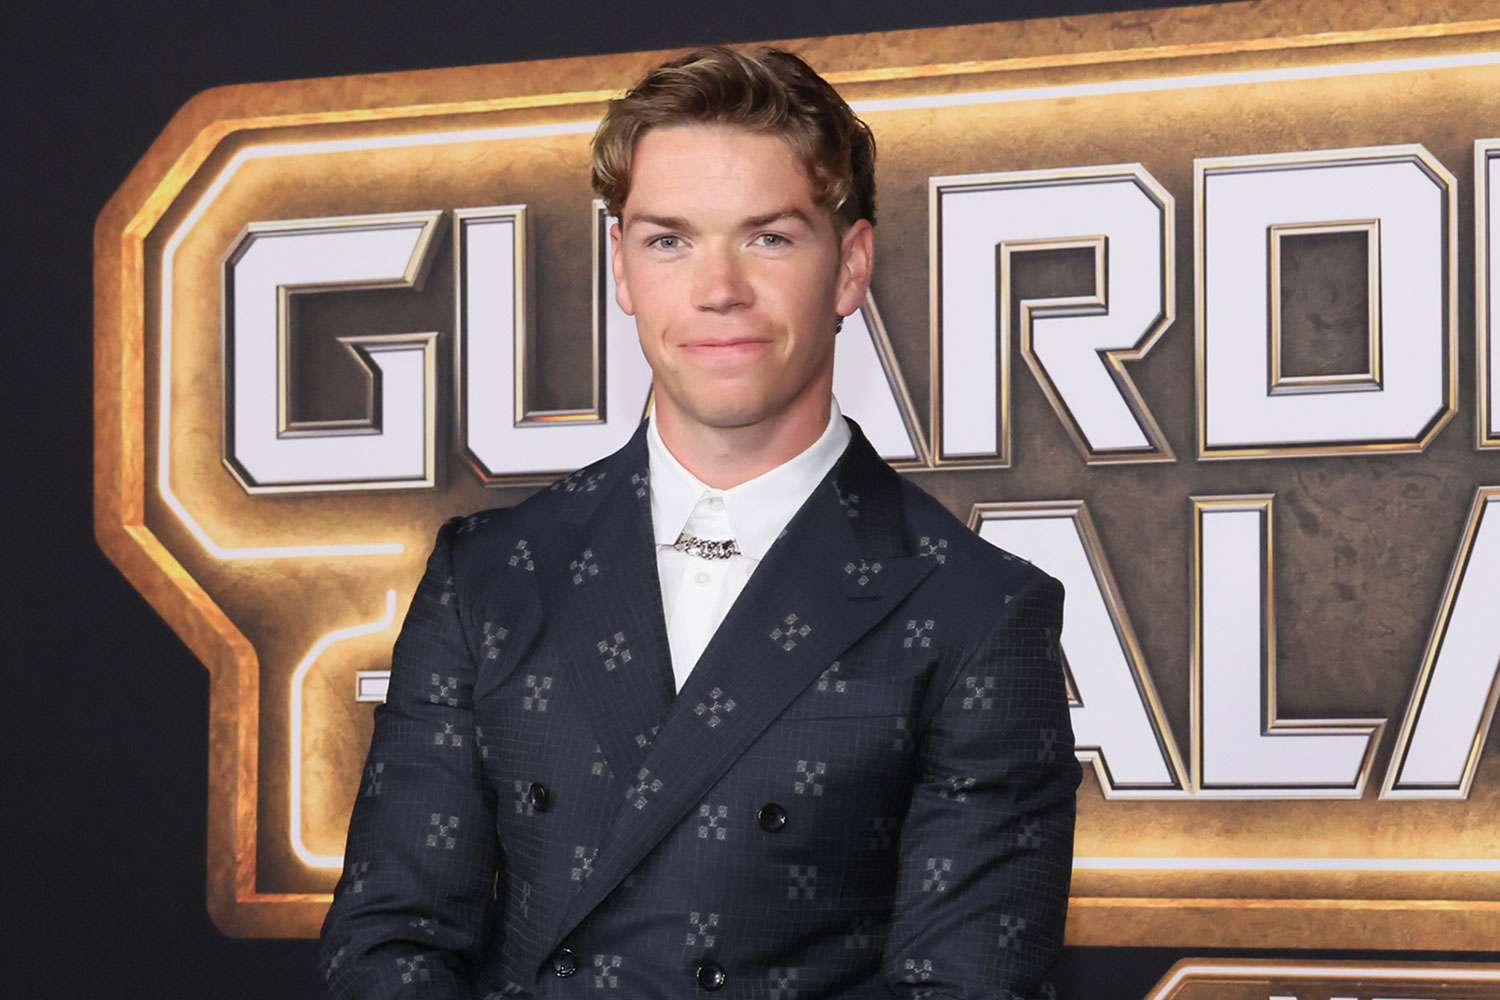 HOLLYWOOD, CALIFORNIA - APRIL 27: Will Poulter attends the world premiere of Marvel Studios' "Guardians of the Galaxy Vol. 3" at Dolby Theatre on April 27, 2023 in Hollywood, California. (Photo by Rodin Eckenroth/GA/The Hollywood Reporter via Getty Images)